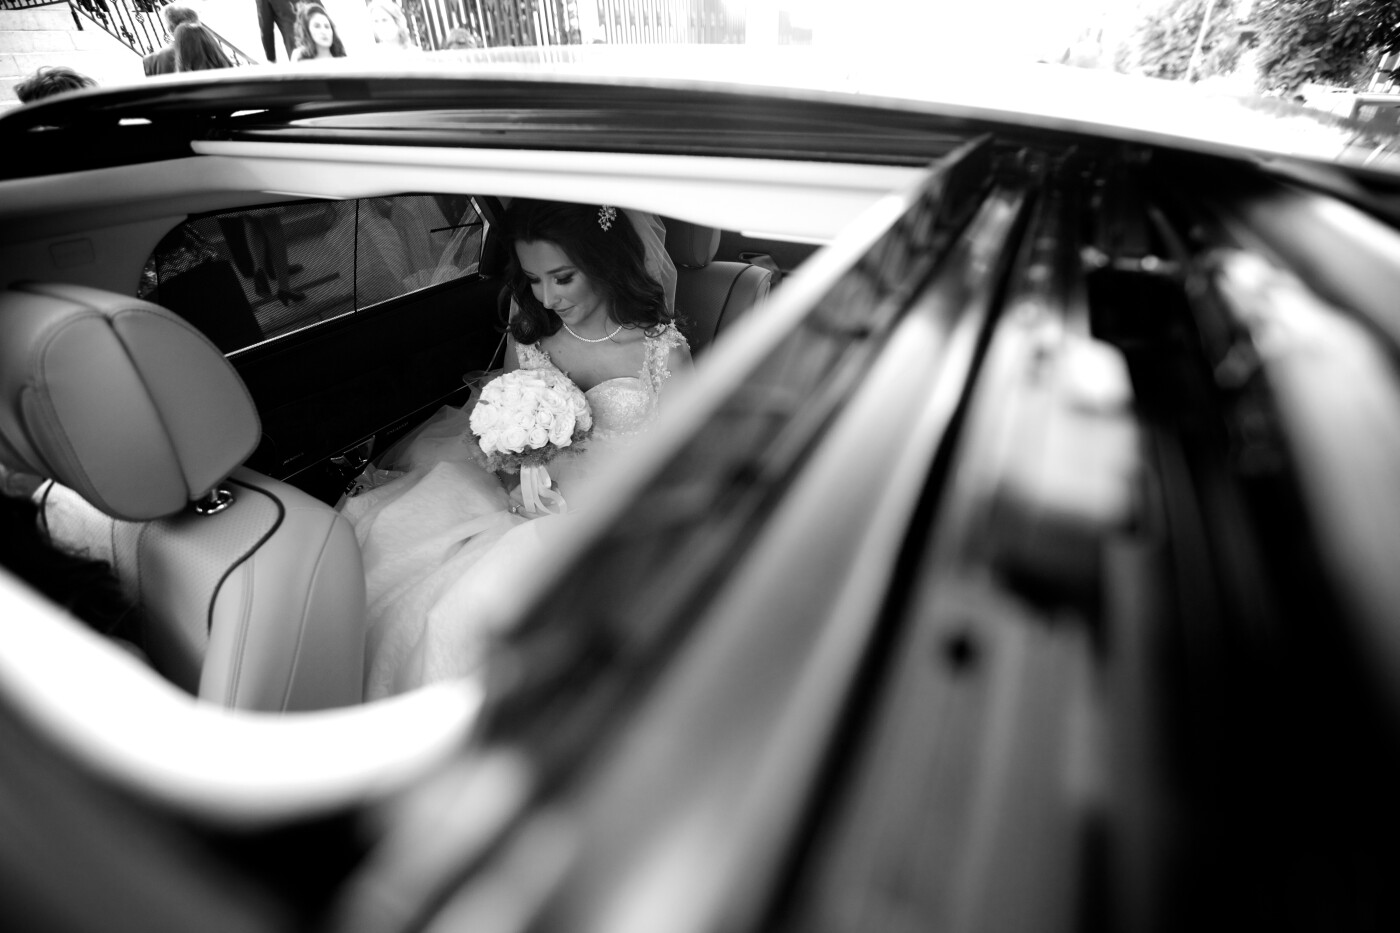 There's nothing like capturing a natural, peaceful smile, and the beautiful Dasha (@dashahad) was smiling with grace while she was waiting to get out of the car and meet her handsome groom. It was a wonderful moment to capture... :)